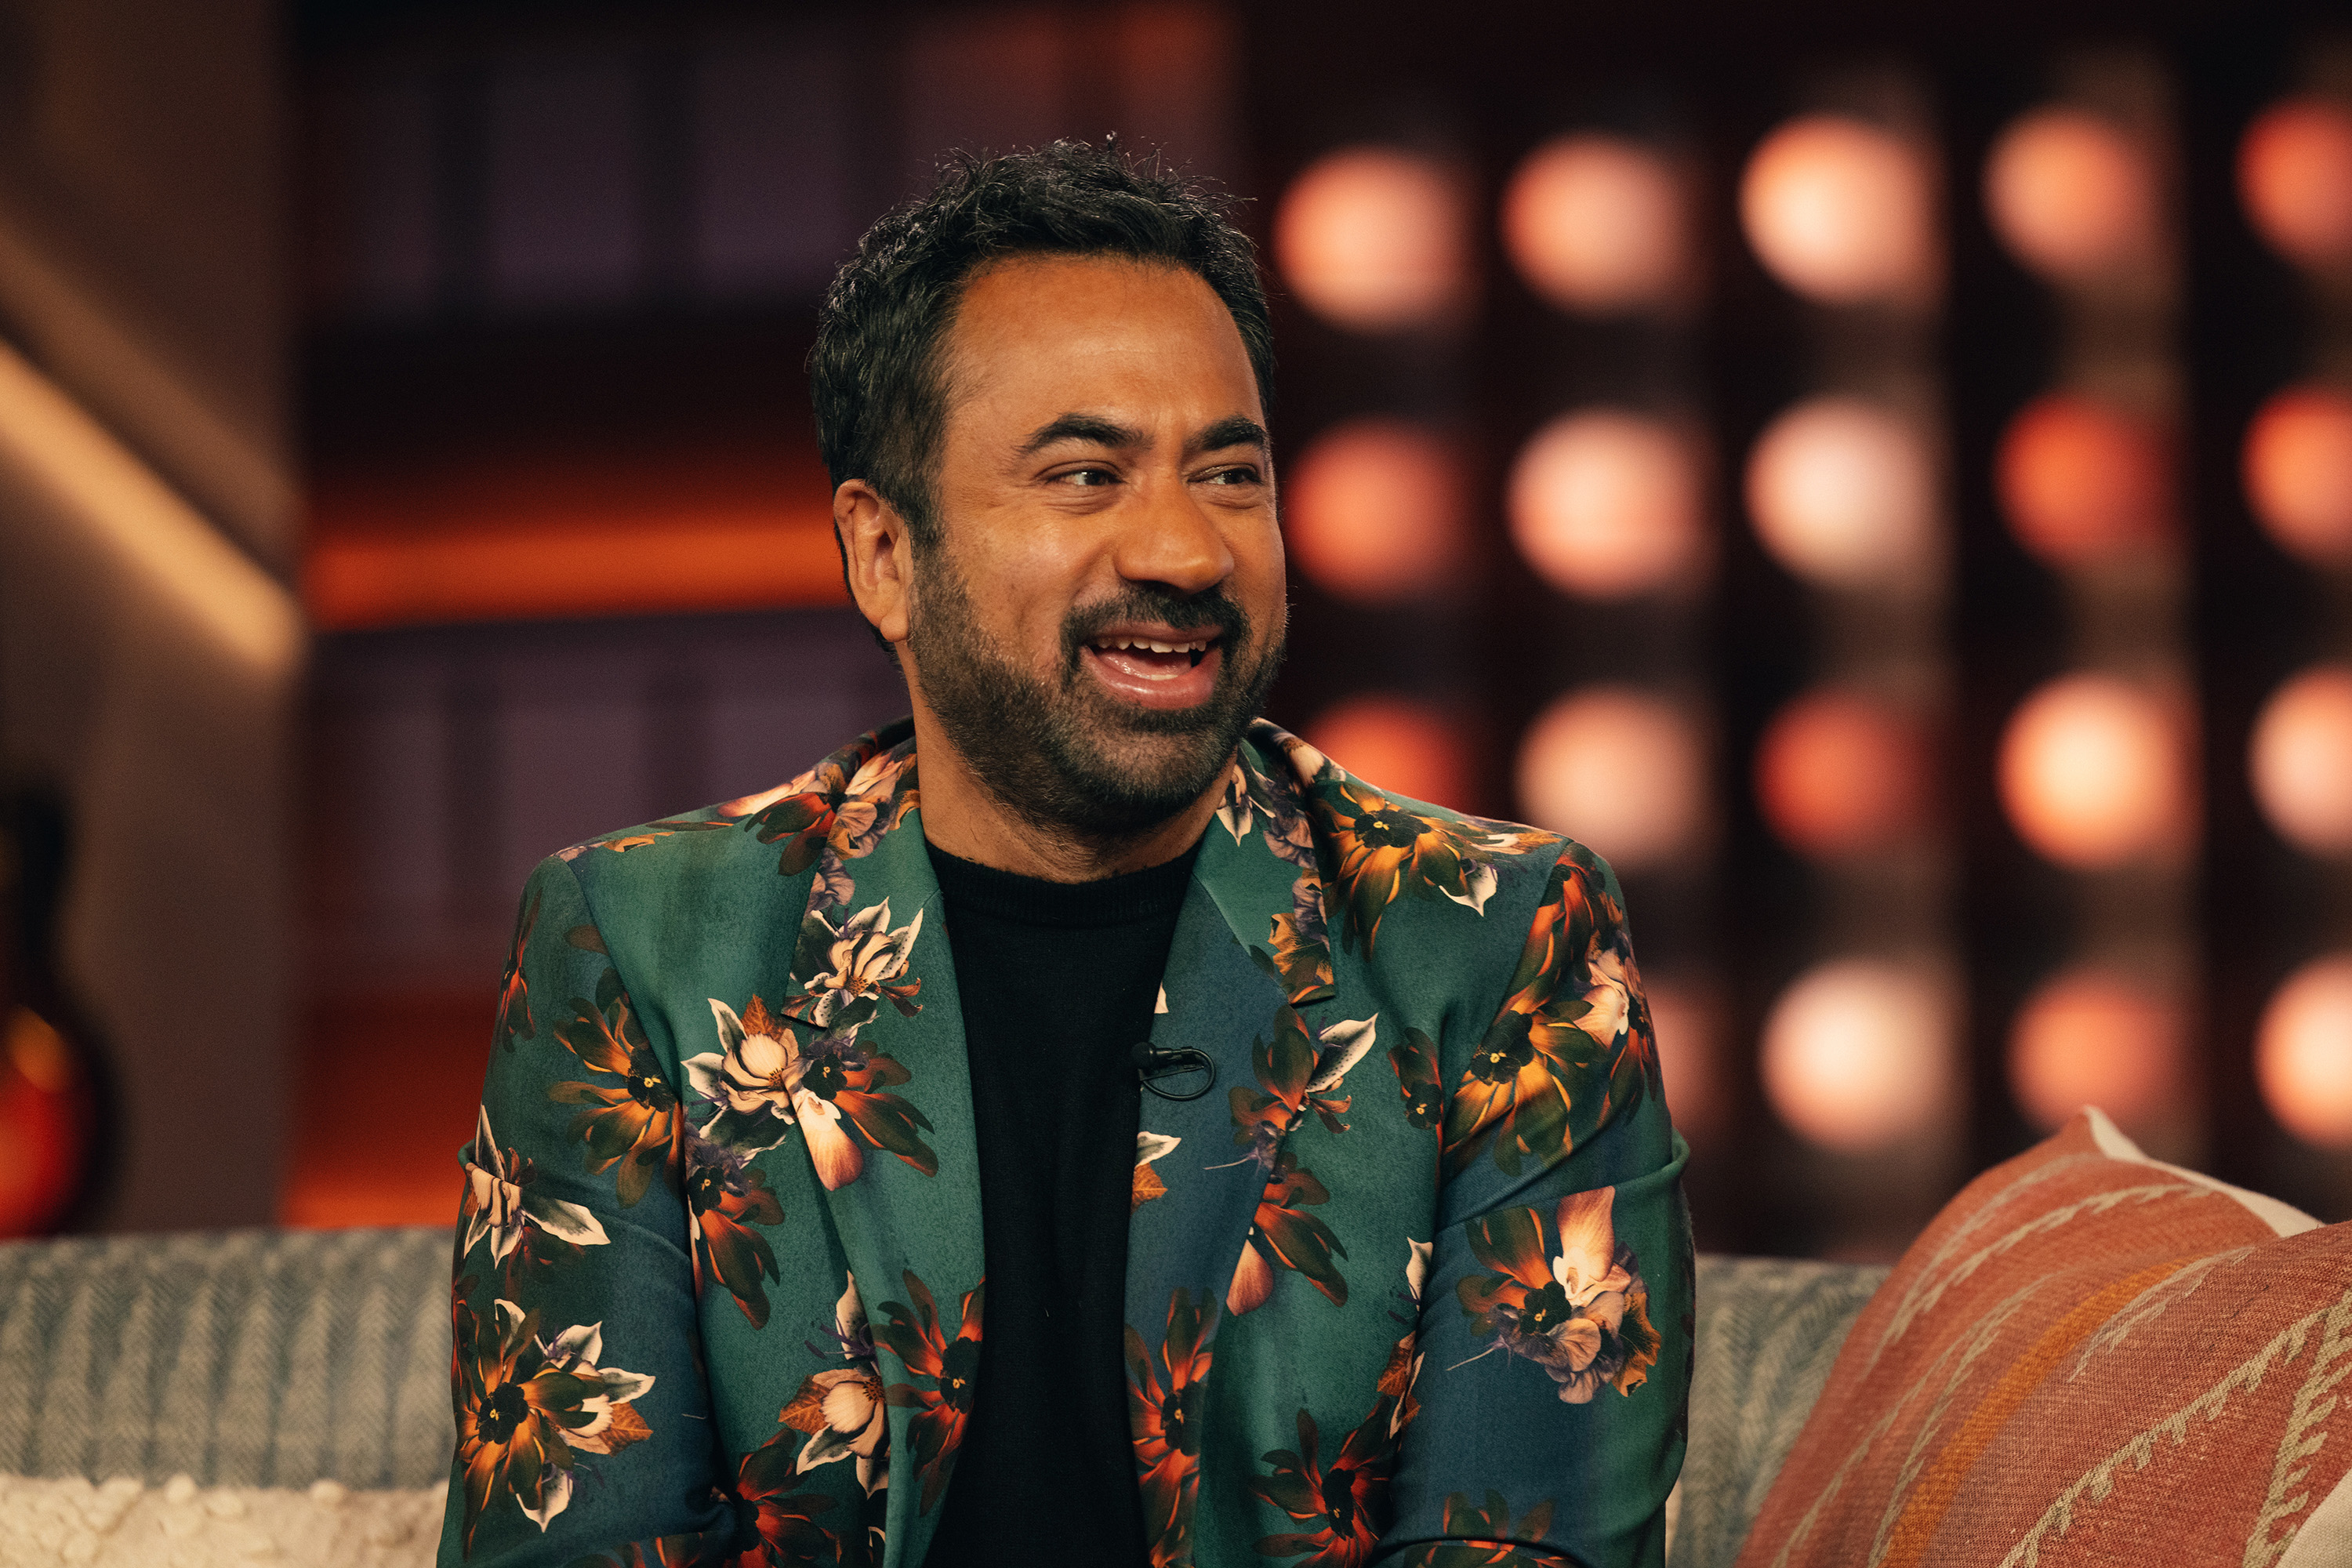 Kal Penn in a floral jacket sitting with a smile on a talk show set